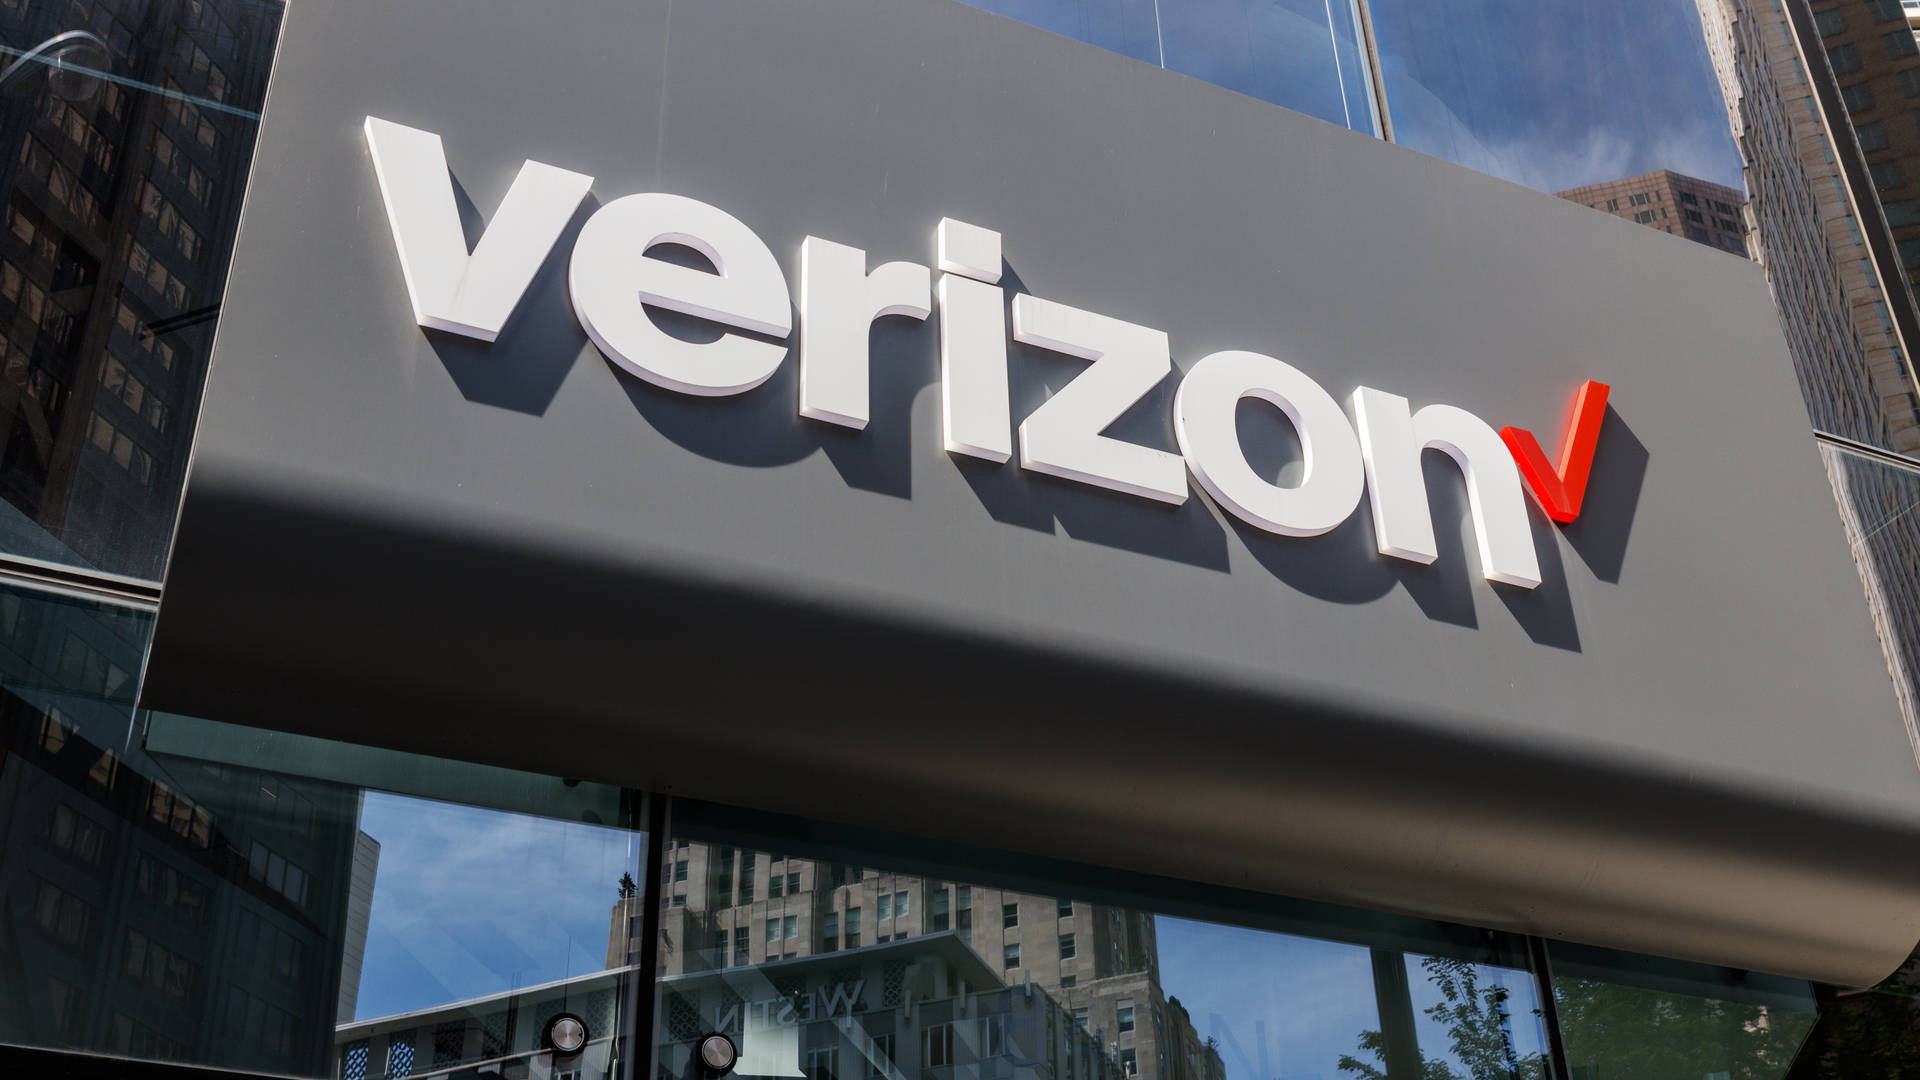 Verizon - Leader In Mobile Network Technology Background